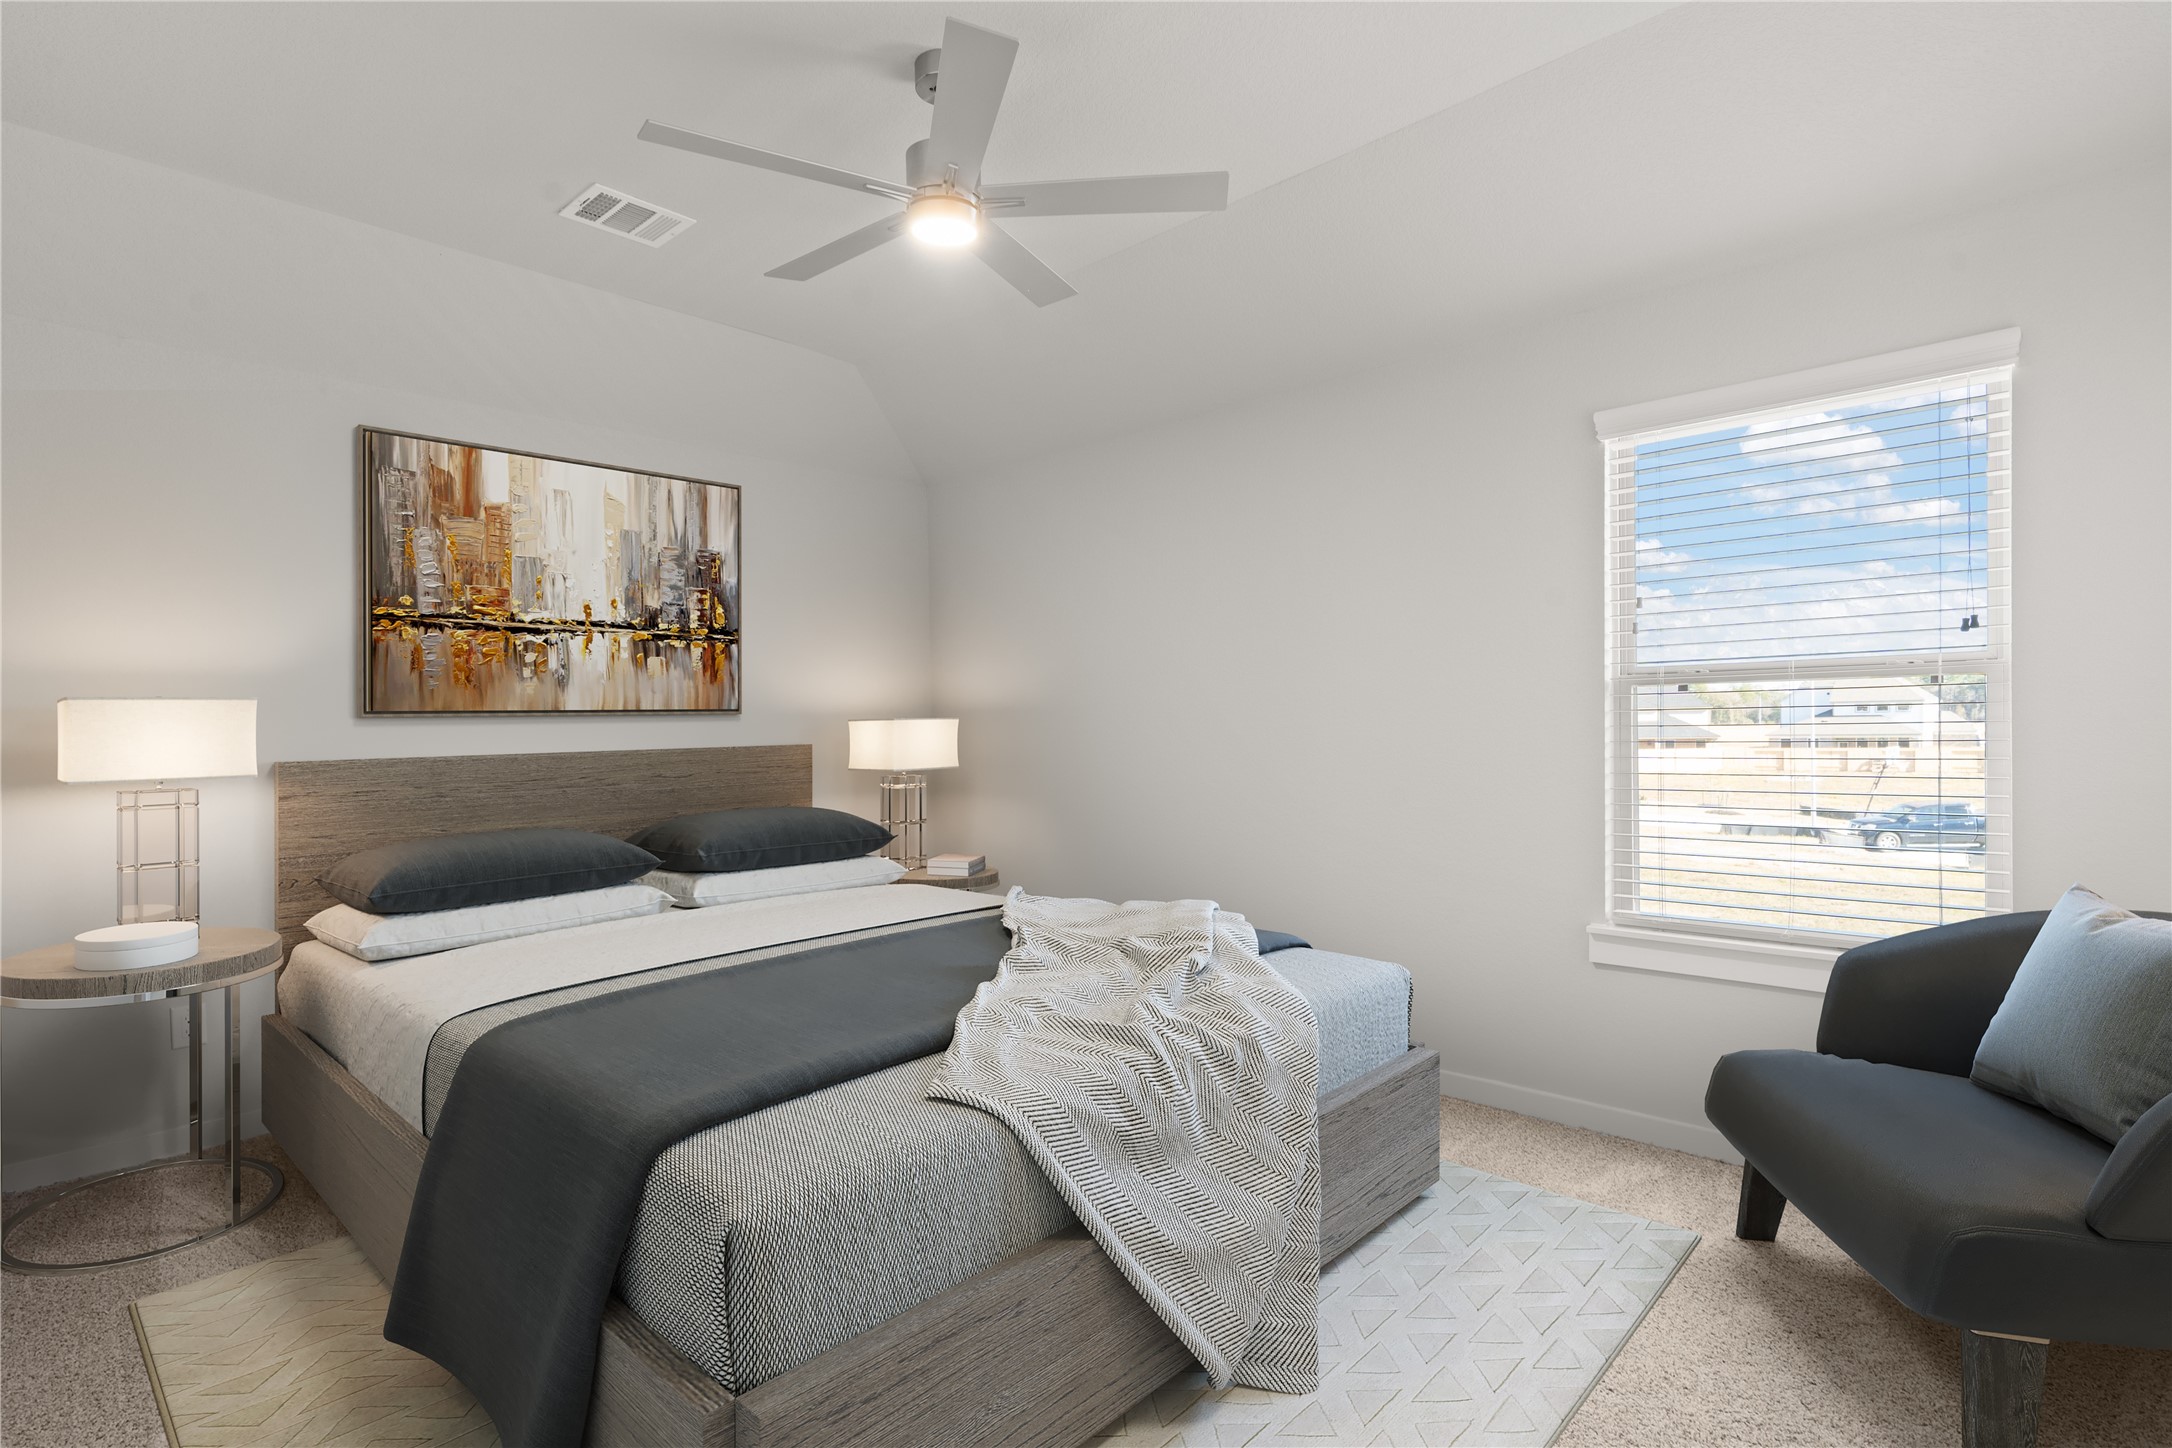 Secondary bedroom features plush carpet, custom paint, ceiling fan with lighting and a large window with privacy blinds.
